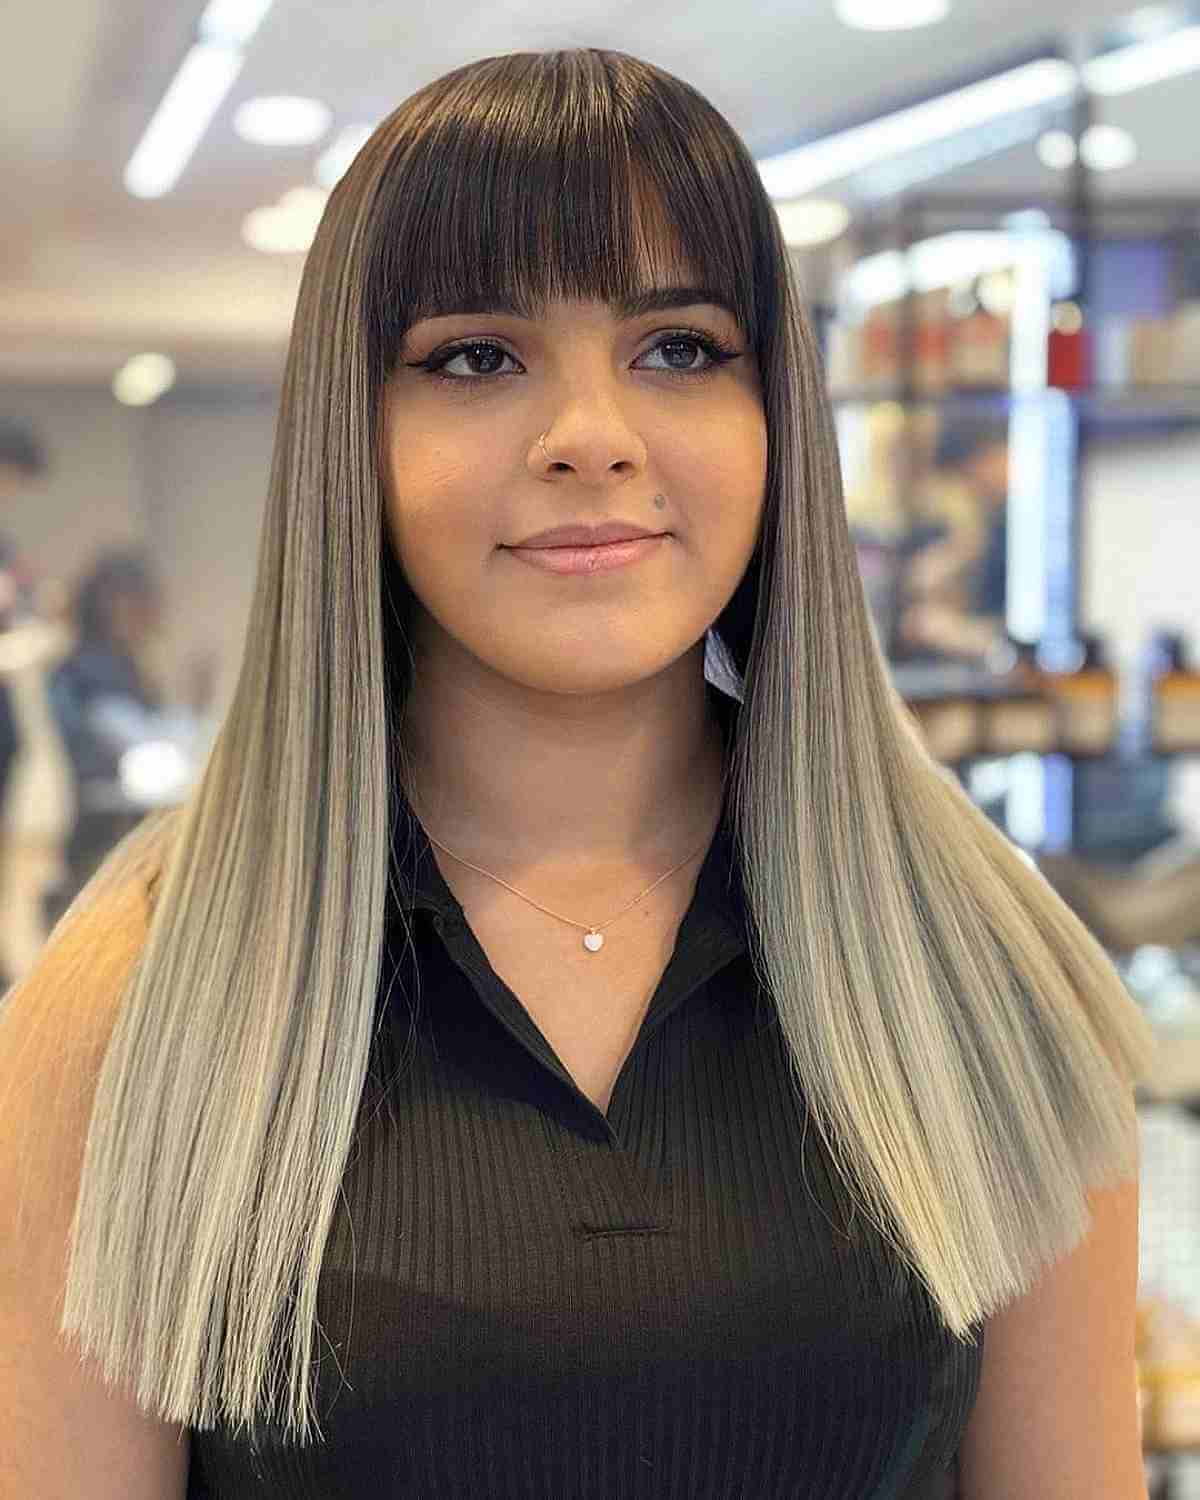 Rounded shaped bangs for women with round faces